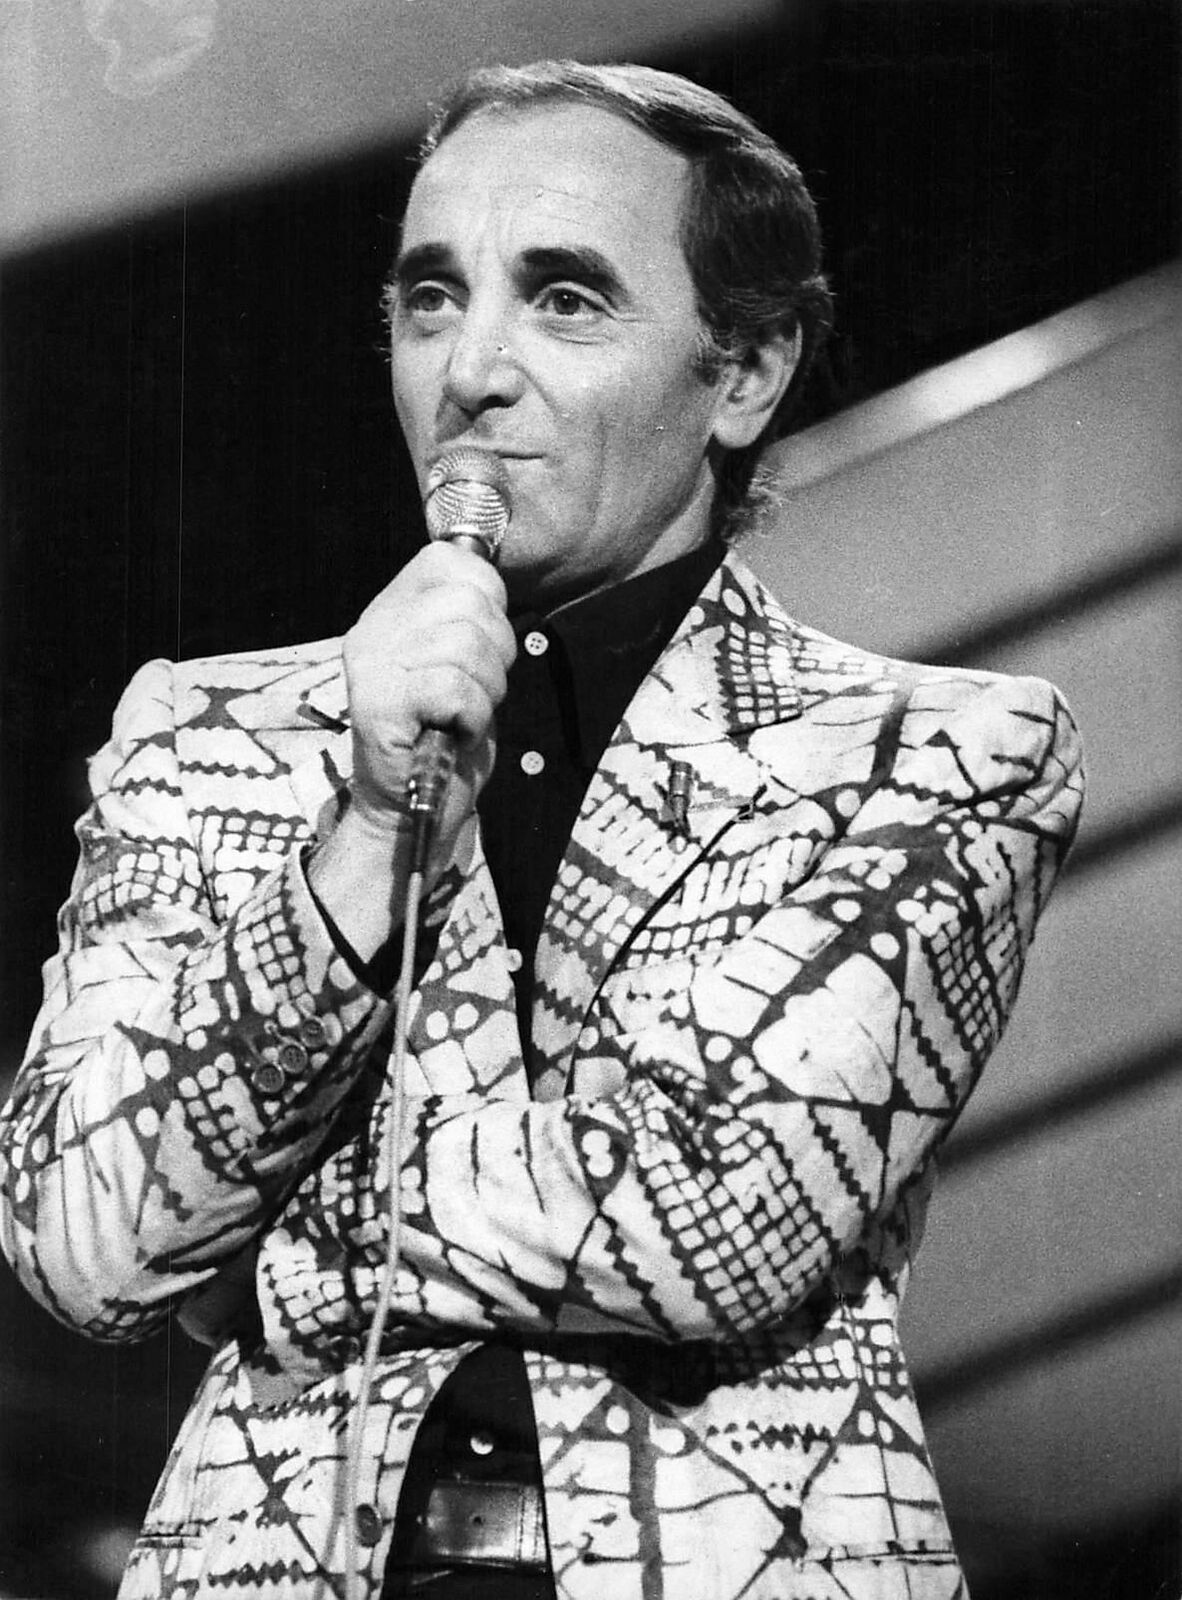 1975 Press Photo CHARLES AZNAVOUR BBC2 sings For You TV show French Armenian kg